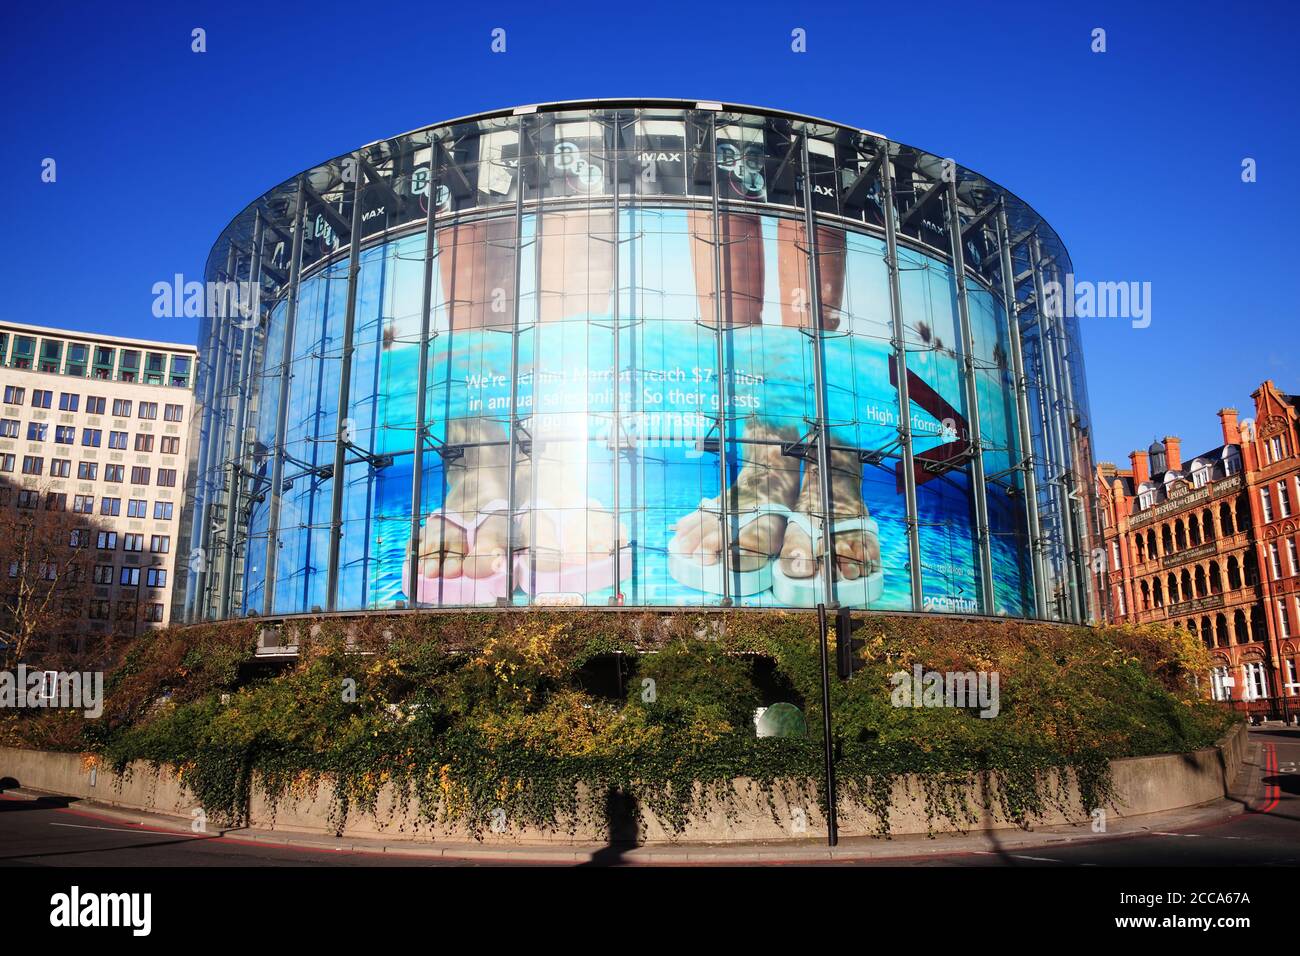 London, UK, January 14, 2012 : The London Imax cinema theatre modern architecture building in Waterloo which is a popular travel destination tourist a Stock Photo